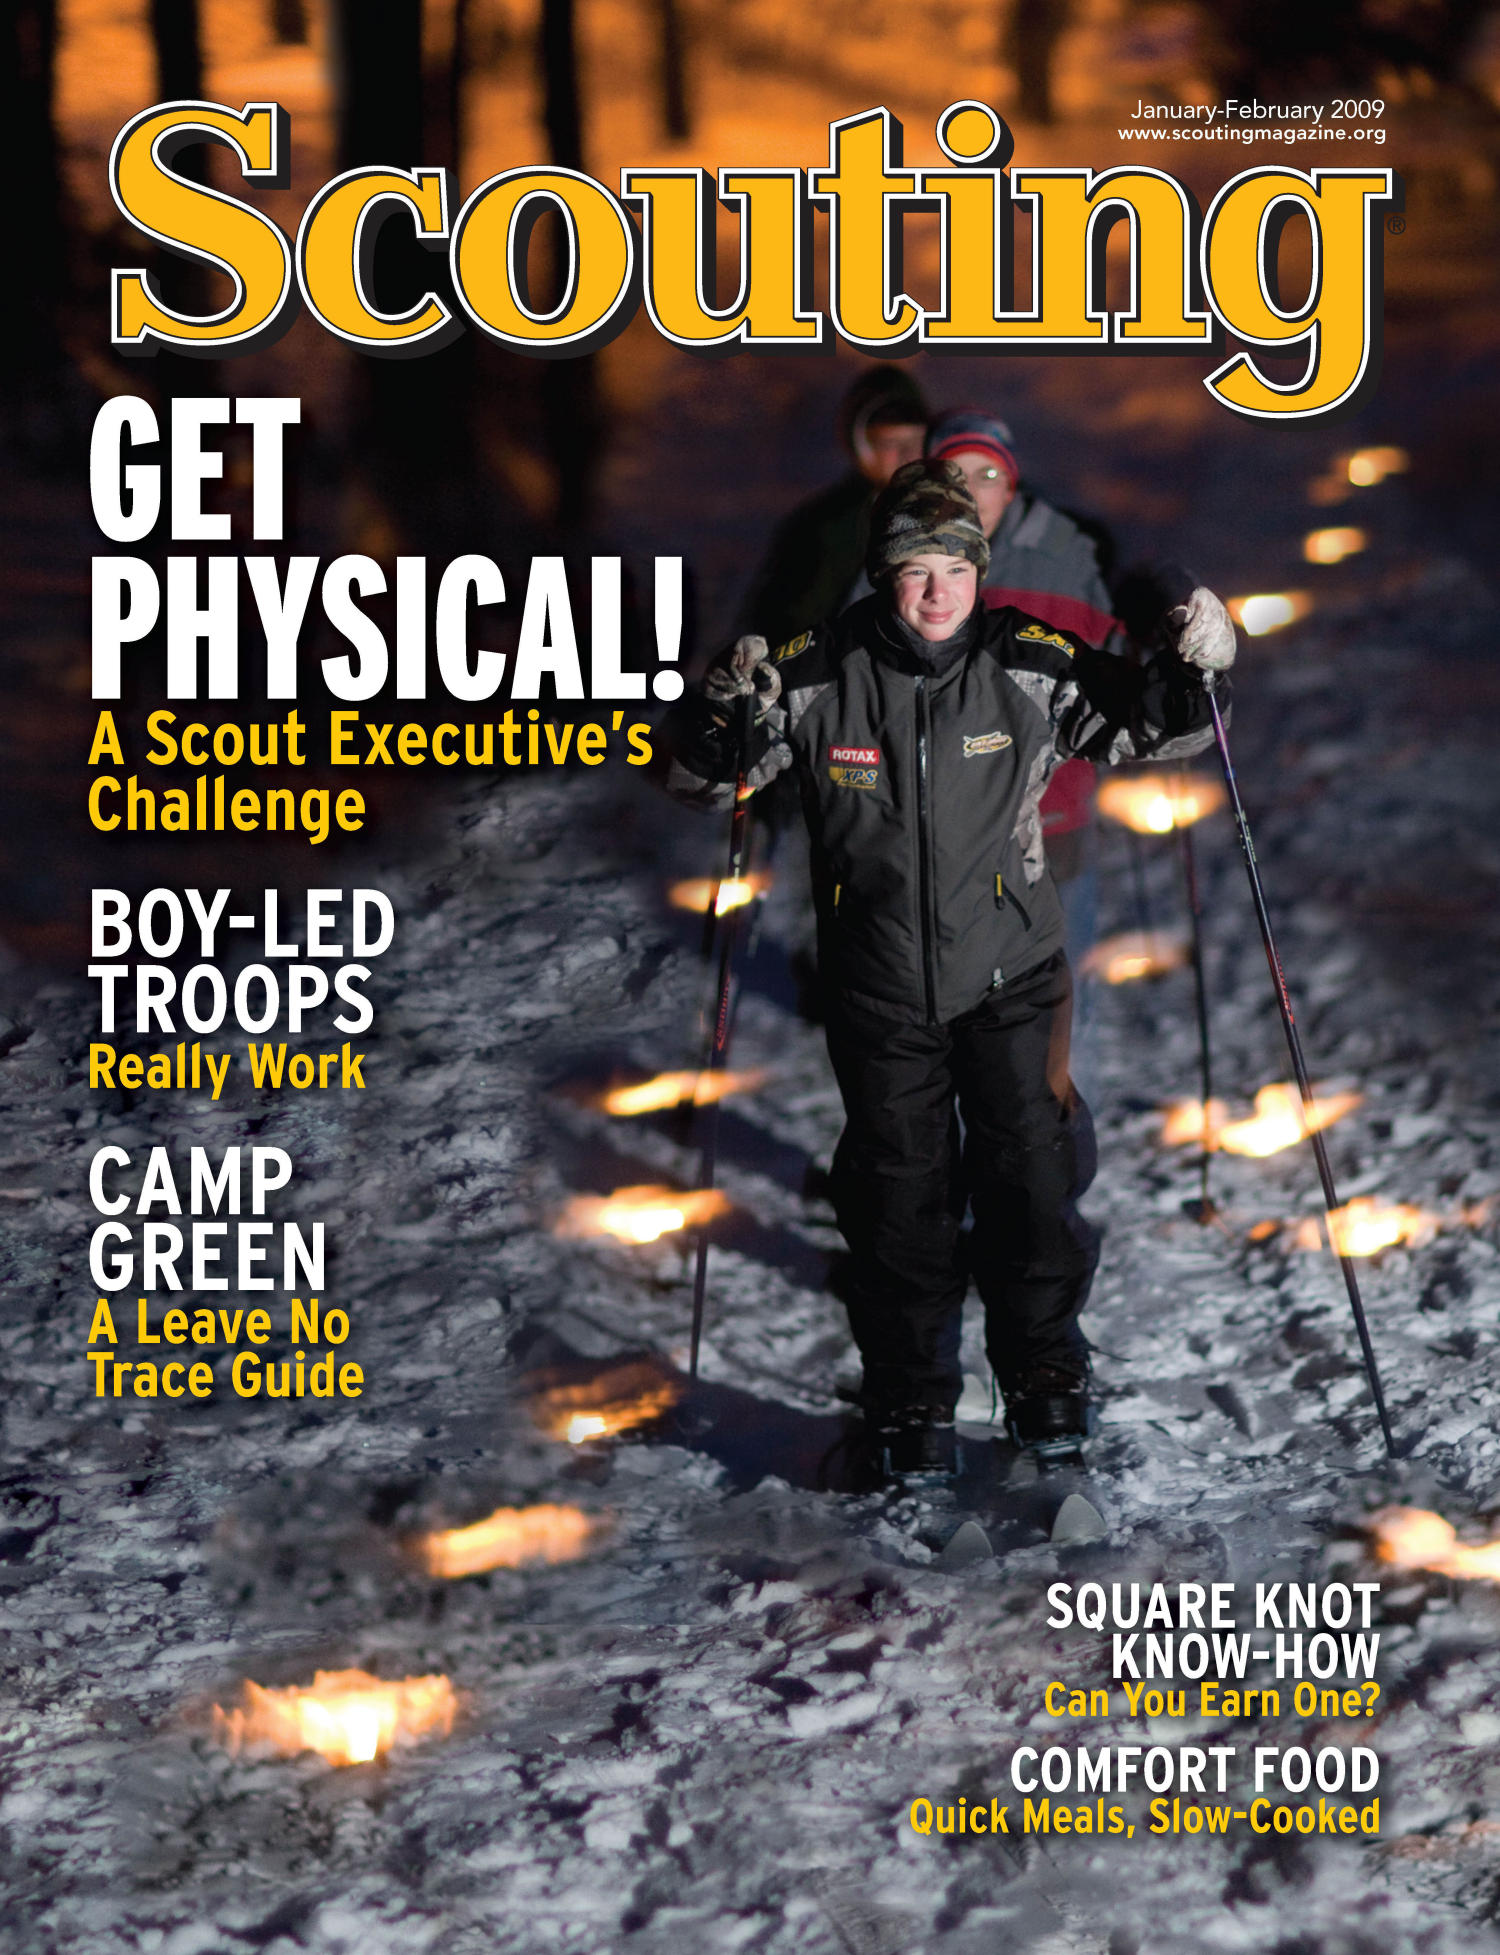 Scouting, Volume 97, Number 1, January-February 2009
                                                
                                                    Front Cover
                                                